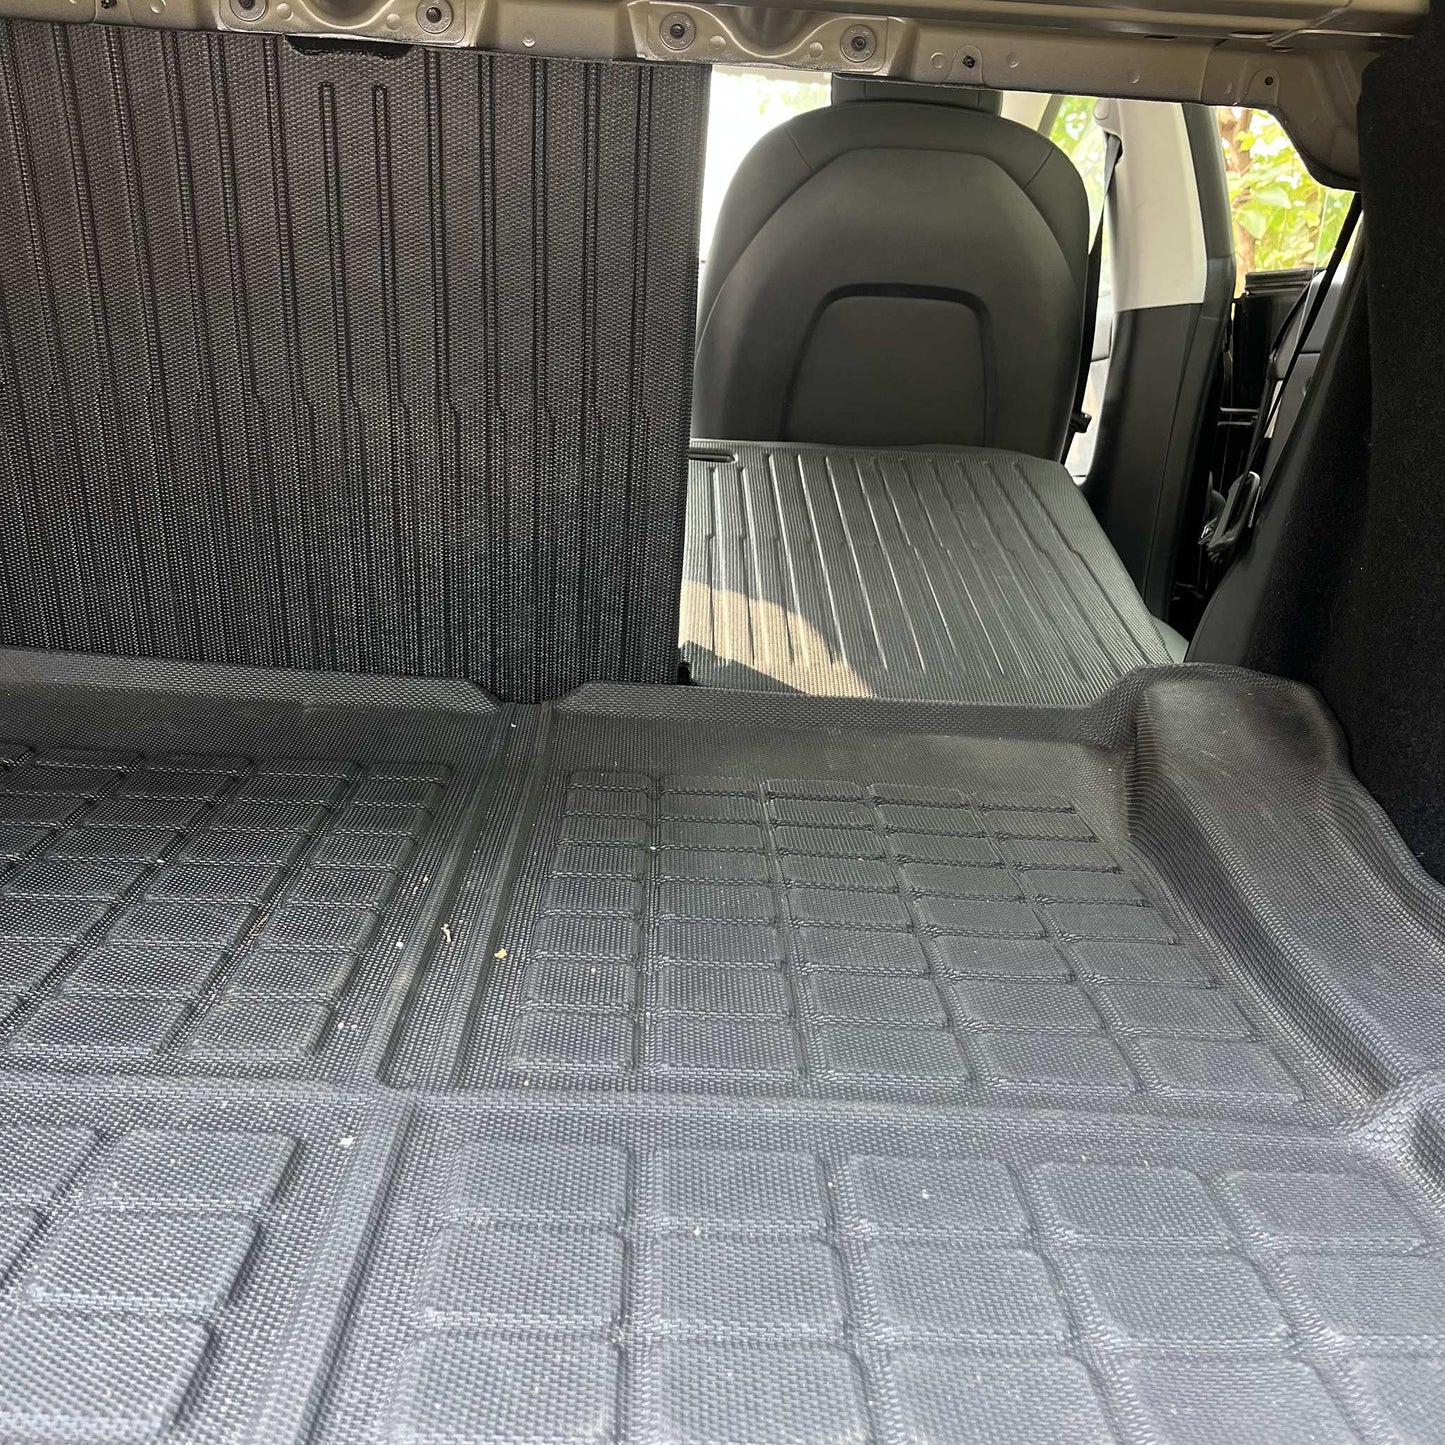 Second Seat Cover Back Liners for Tesla Model 3